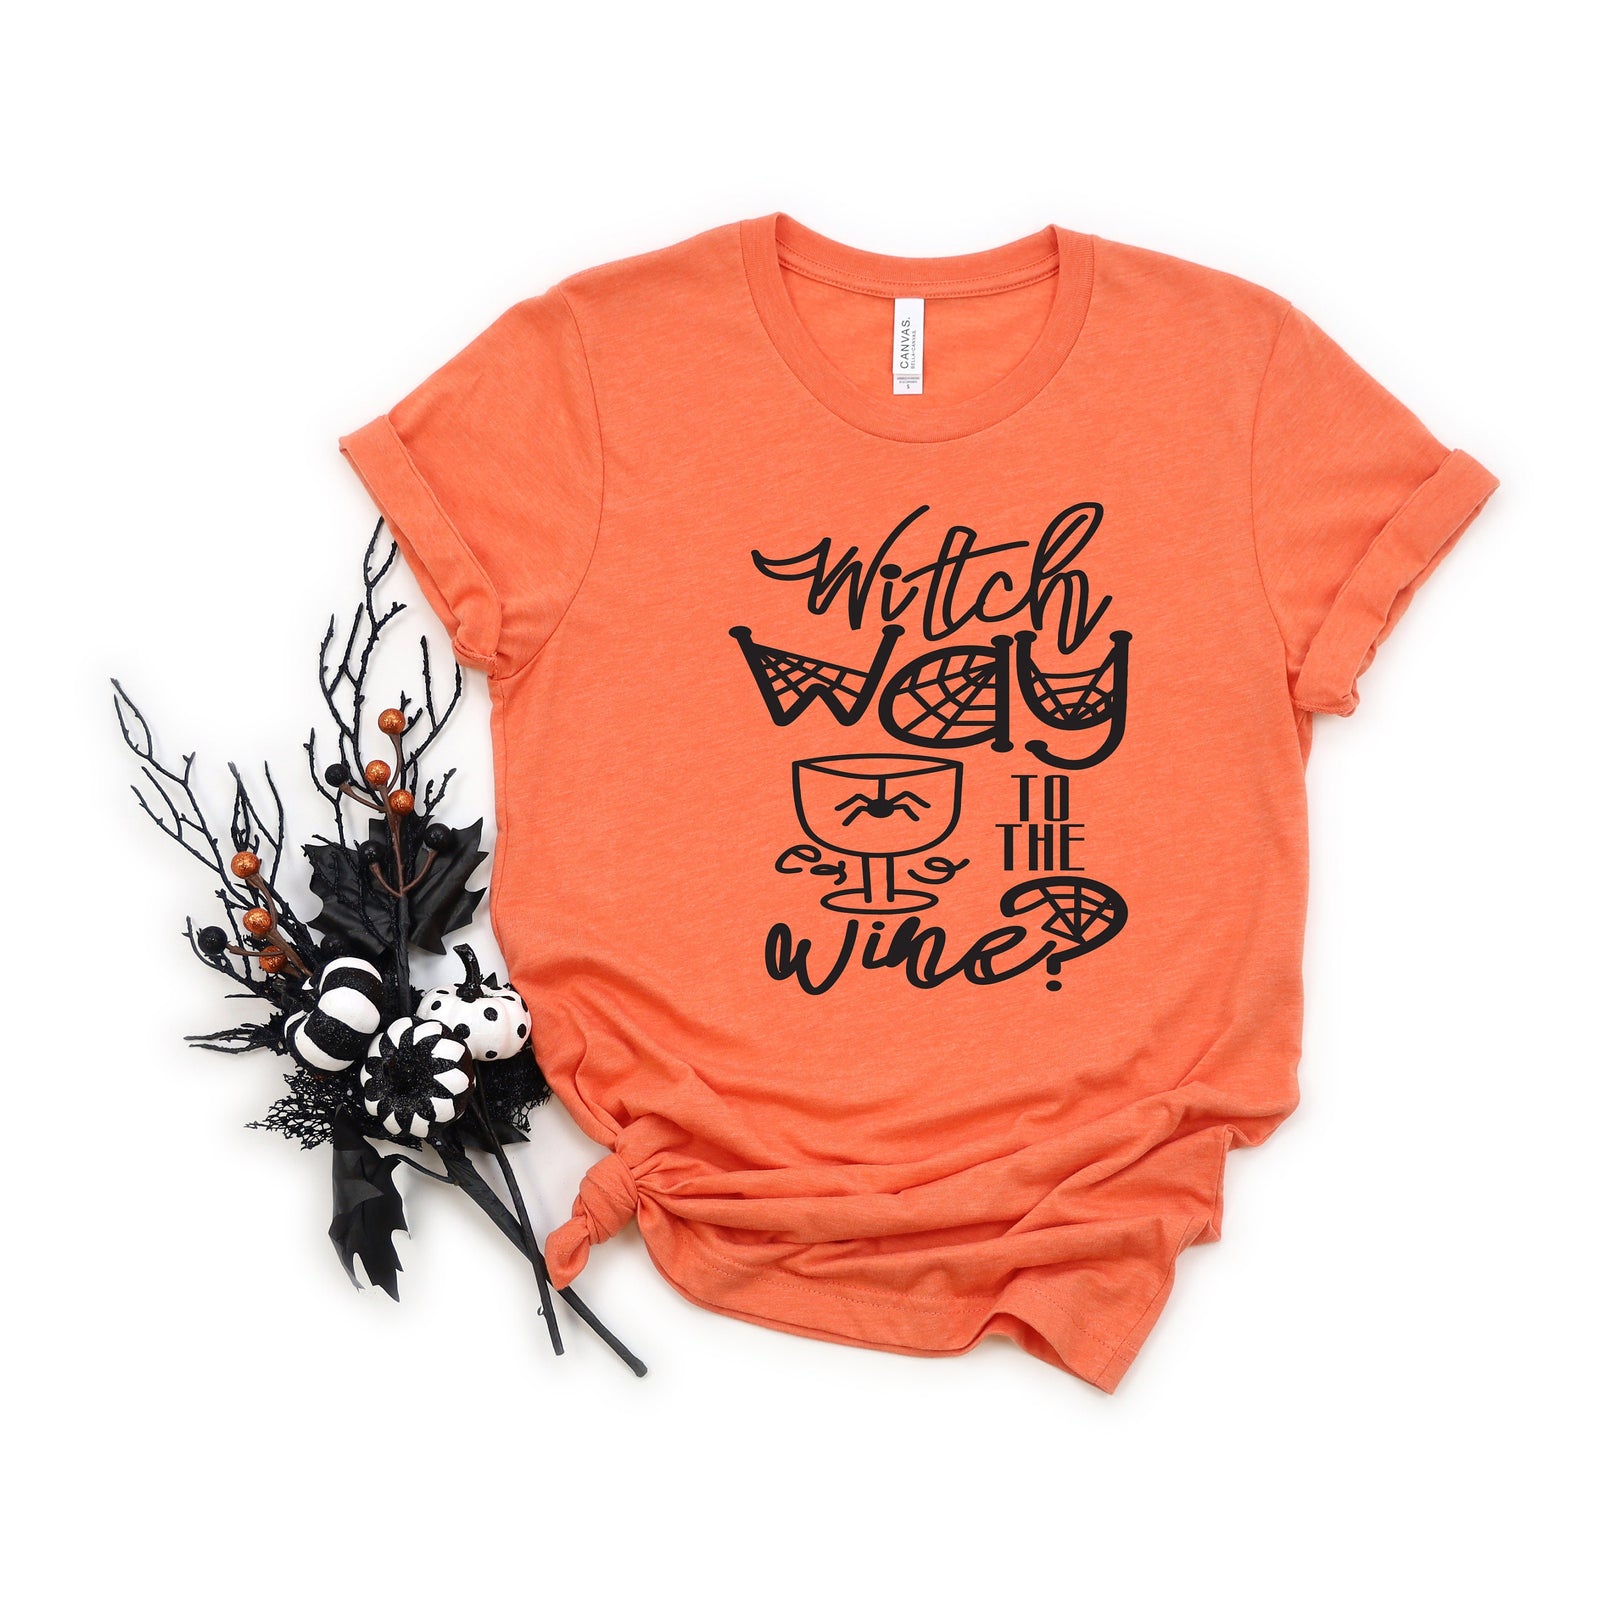 Witch Way to the Wine Adult T Shirt - Halloween - Funny T Shirt - Drinking Wine